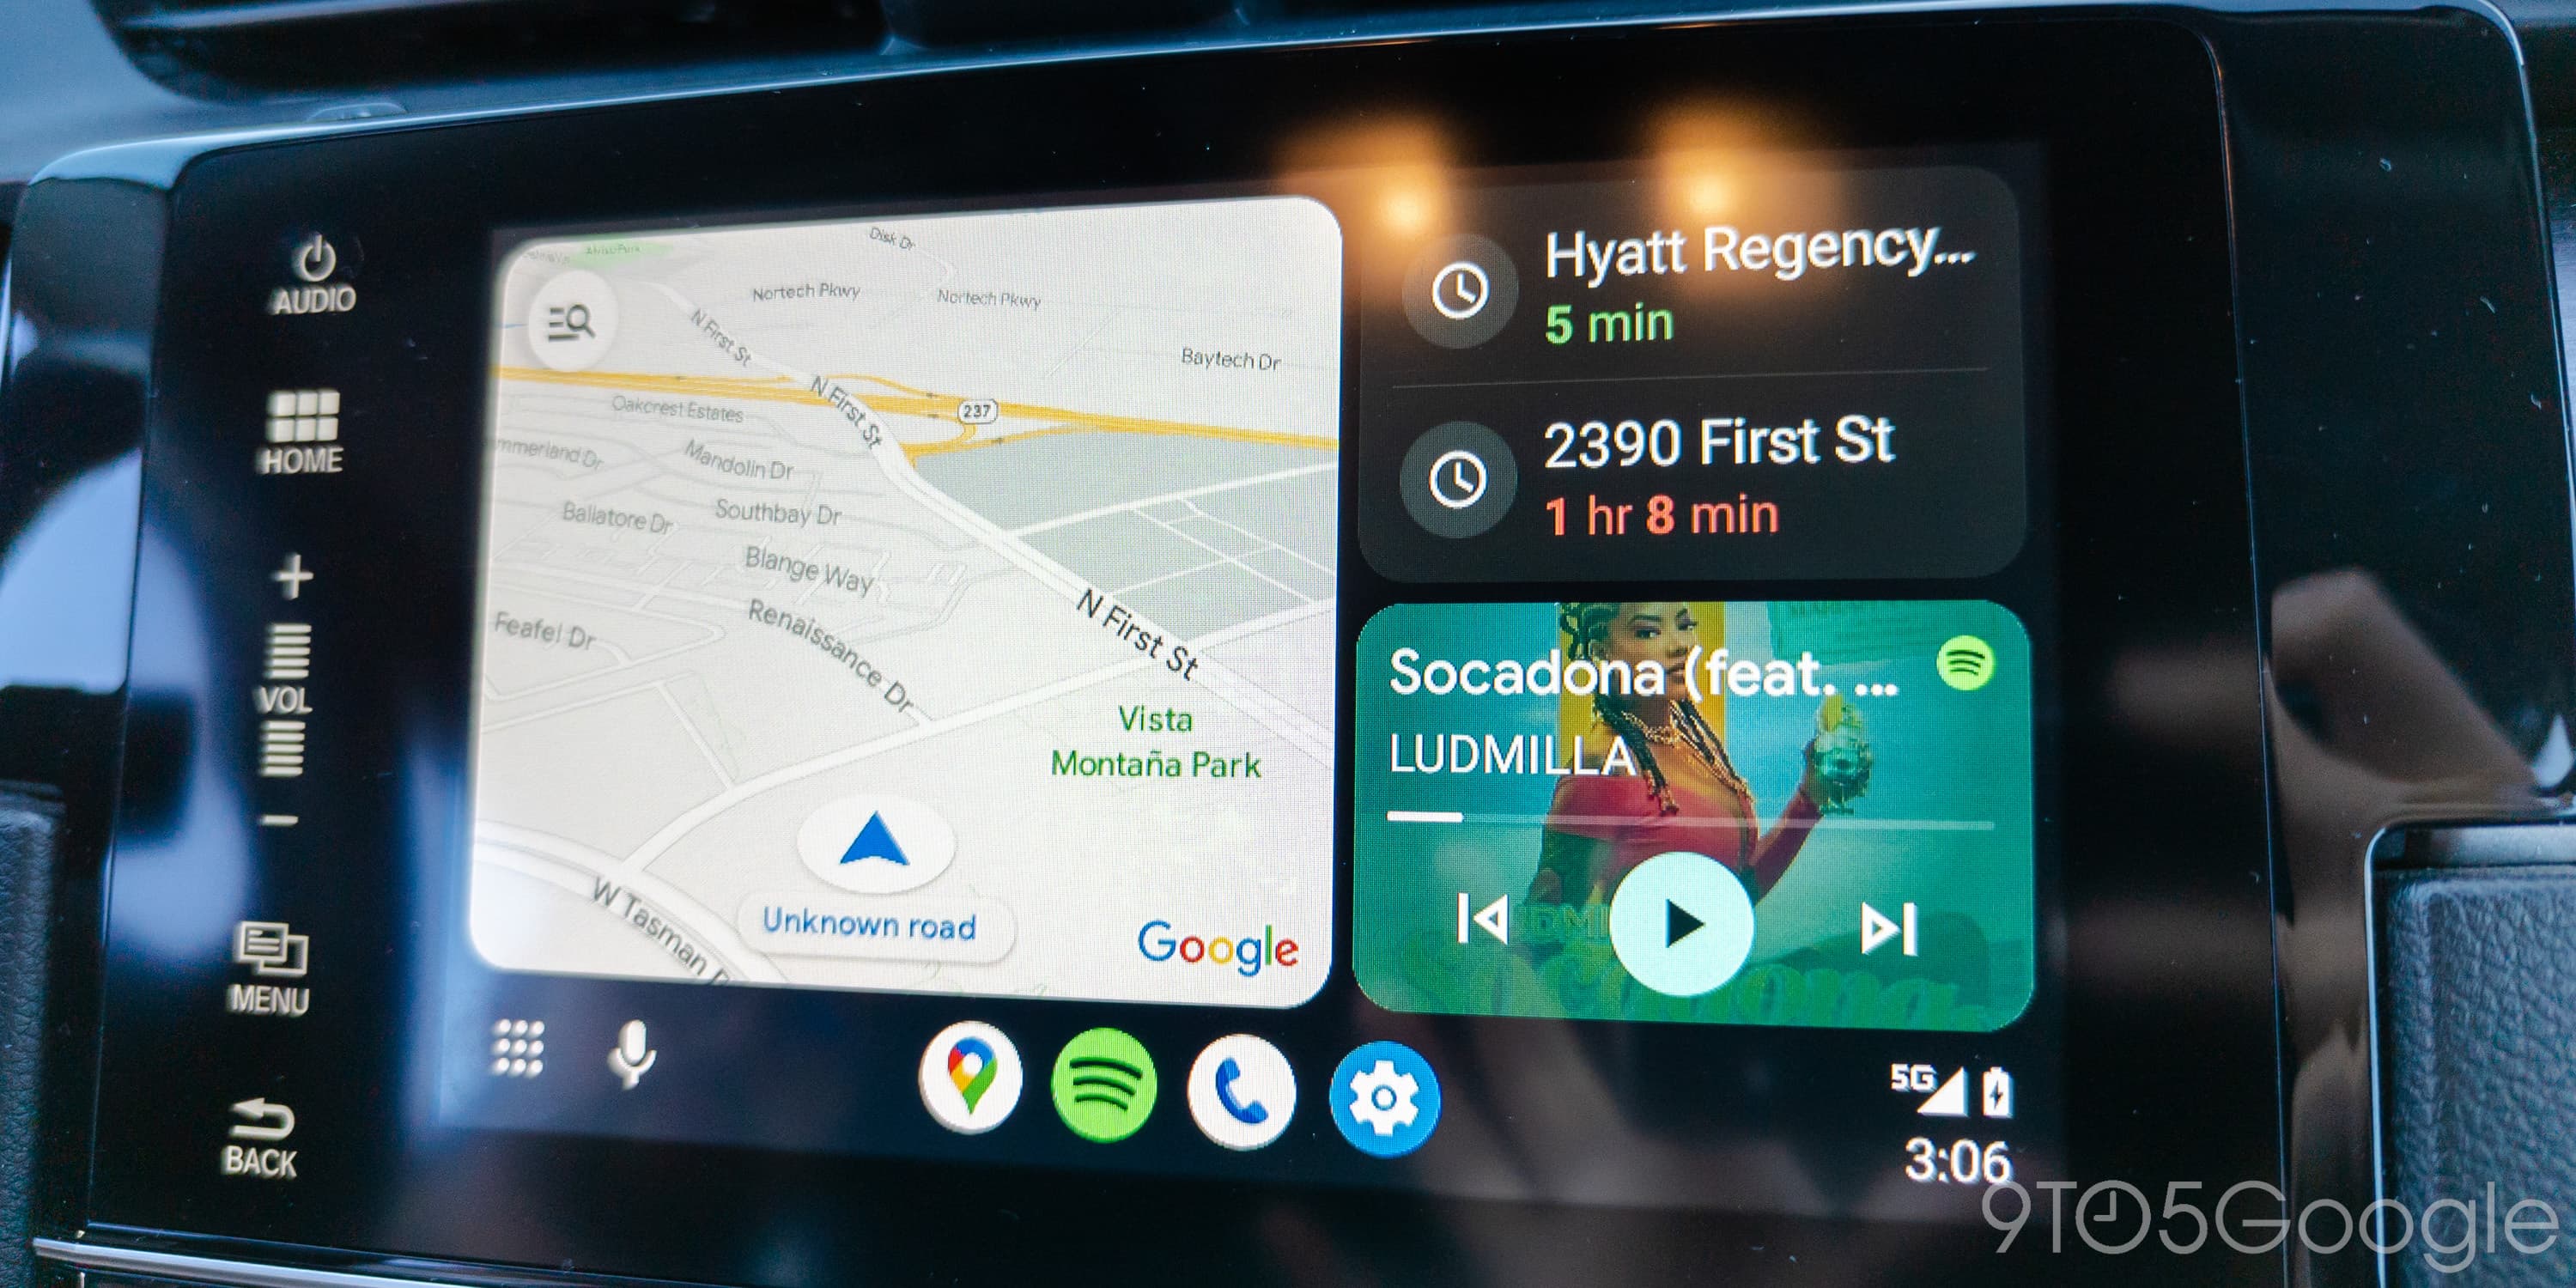 Android Auto updated! New look and better split-screen